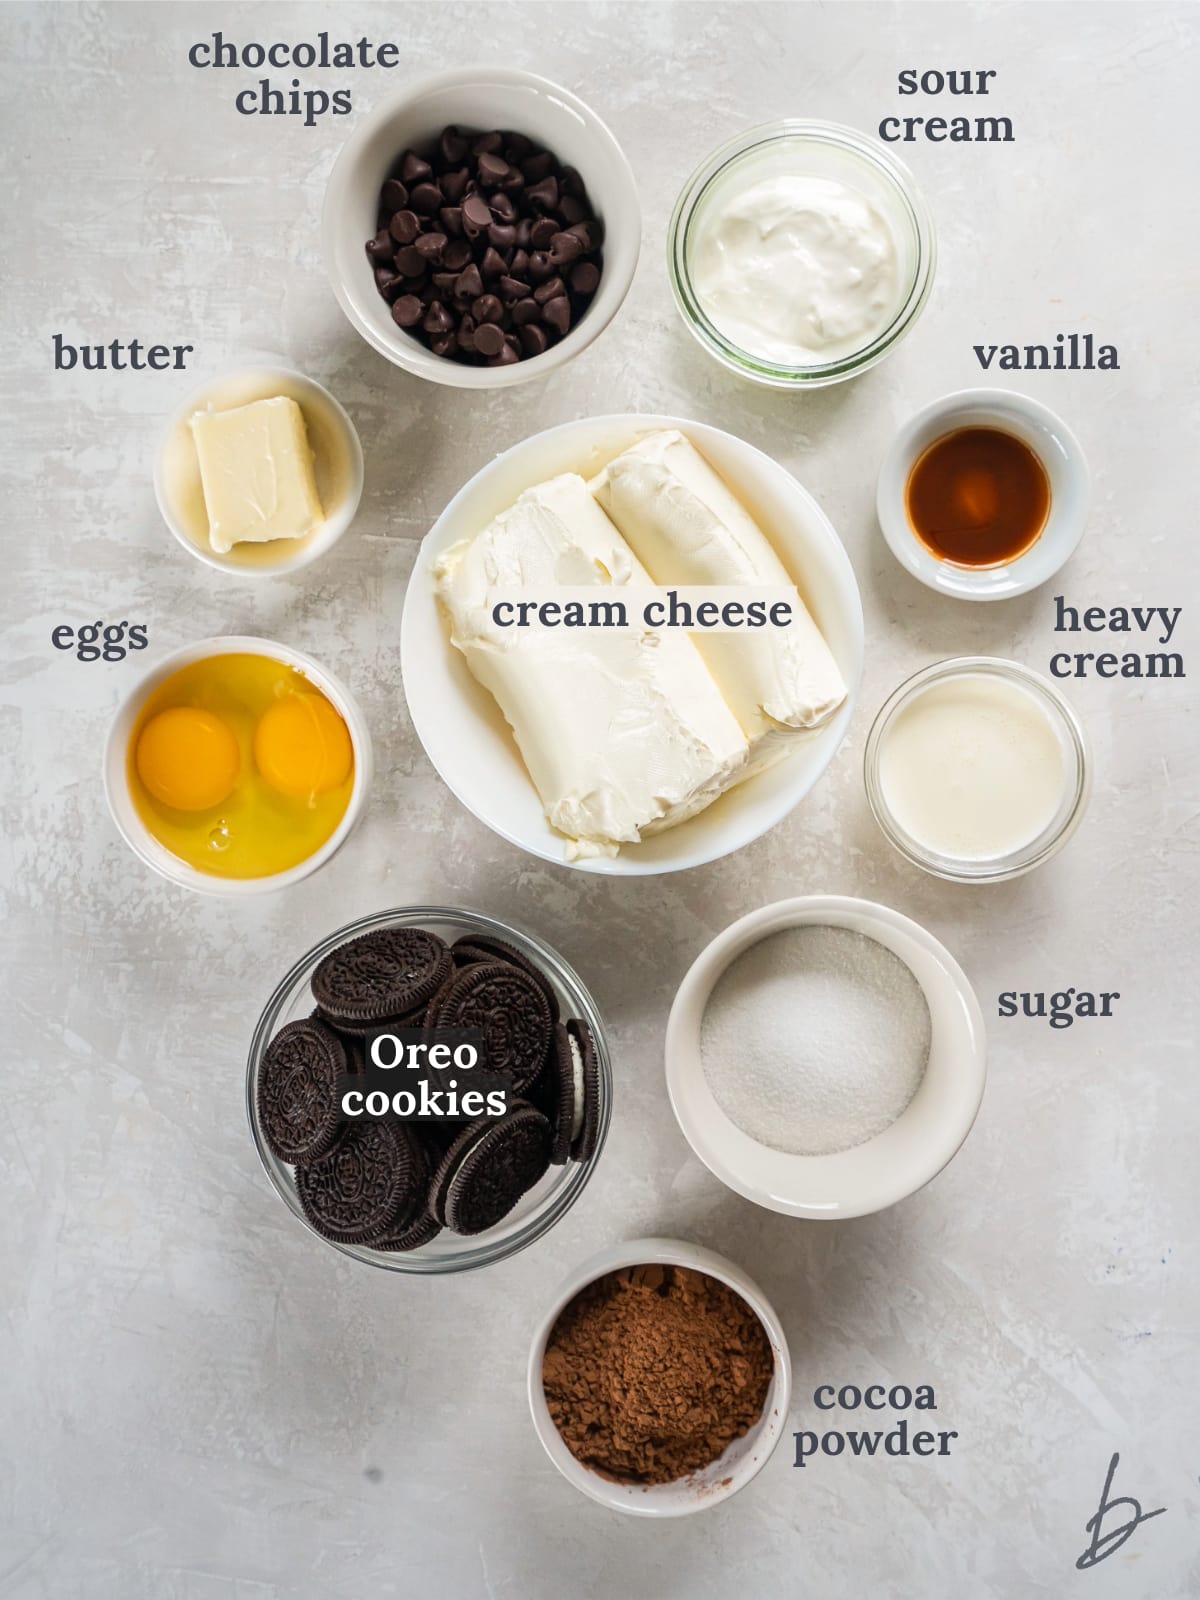 bowls of ingredients to make mini chocolate cheesecakes.